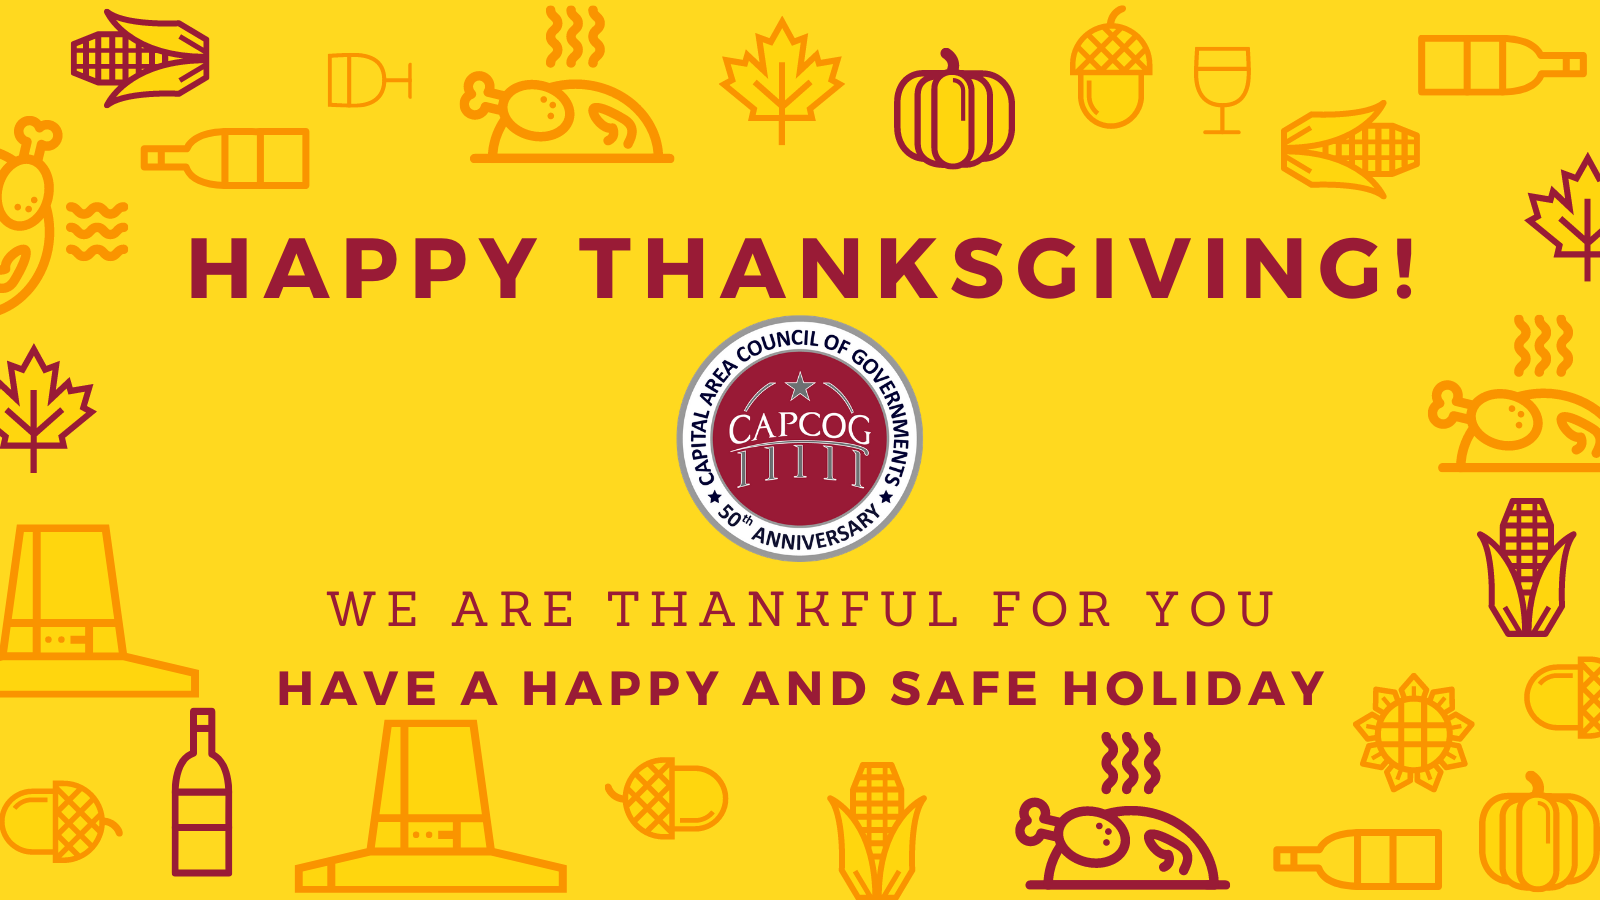 Click to read the CAPCOG holiday hours.